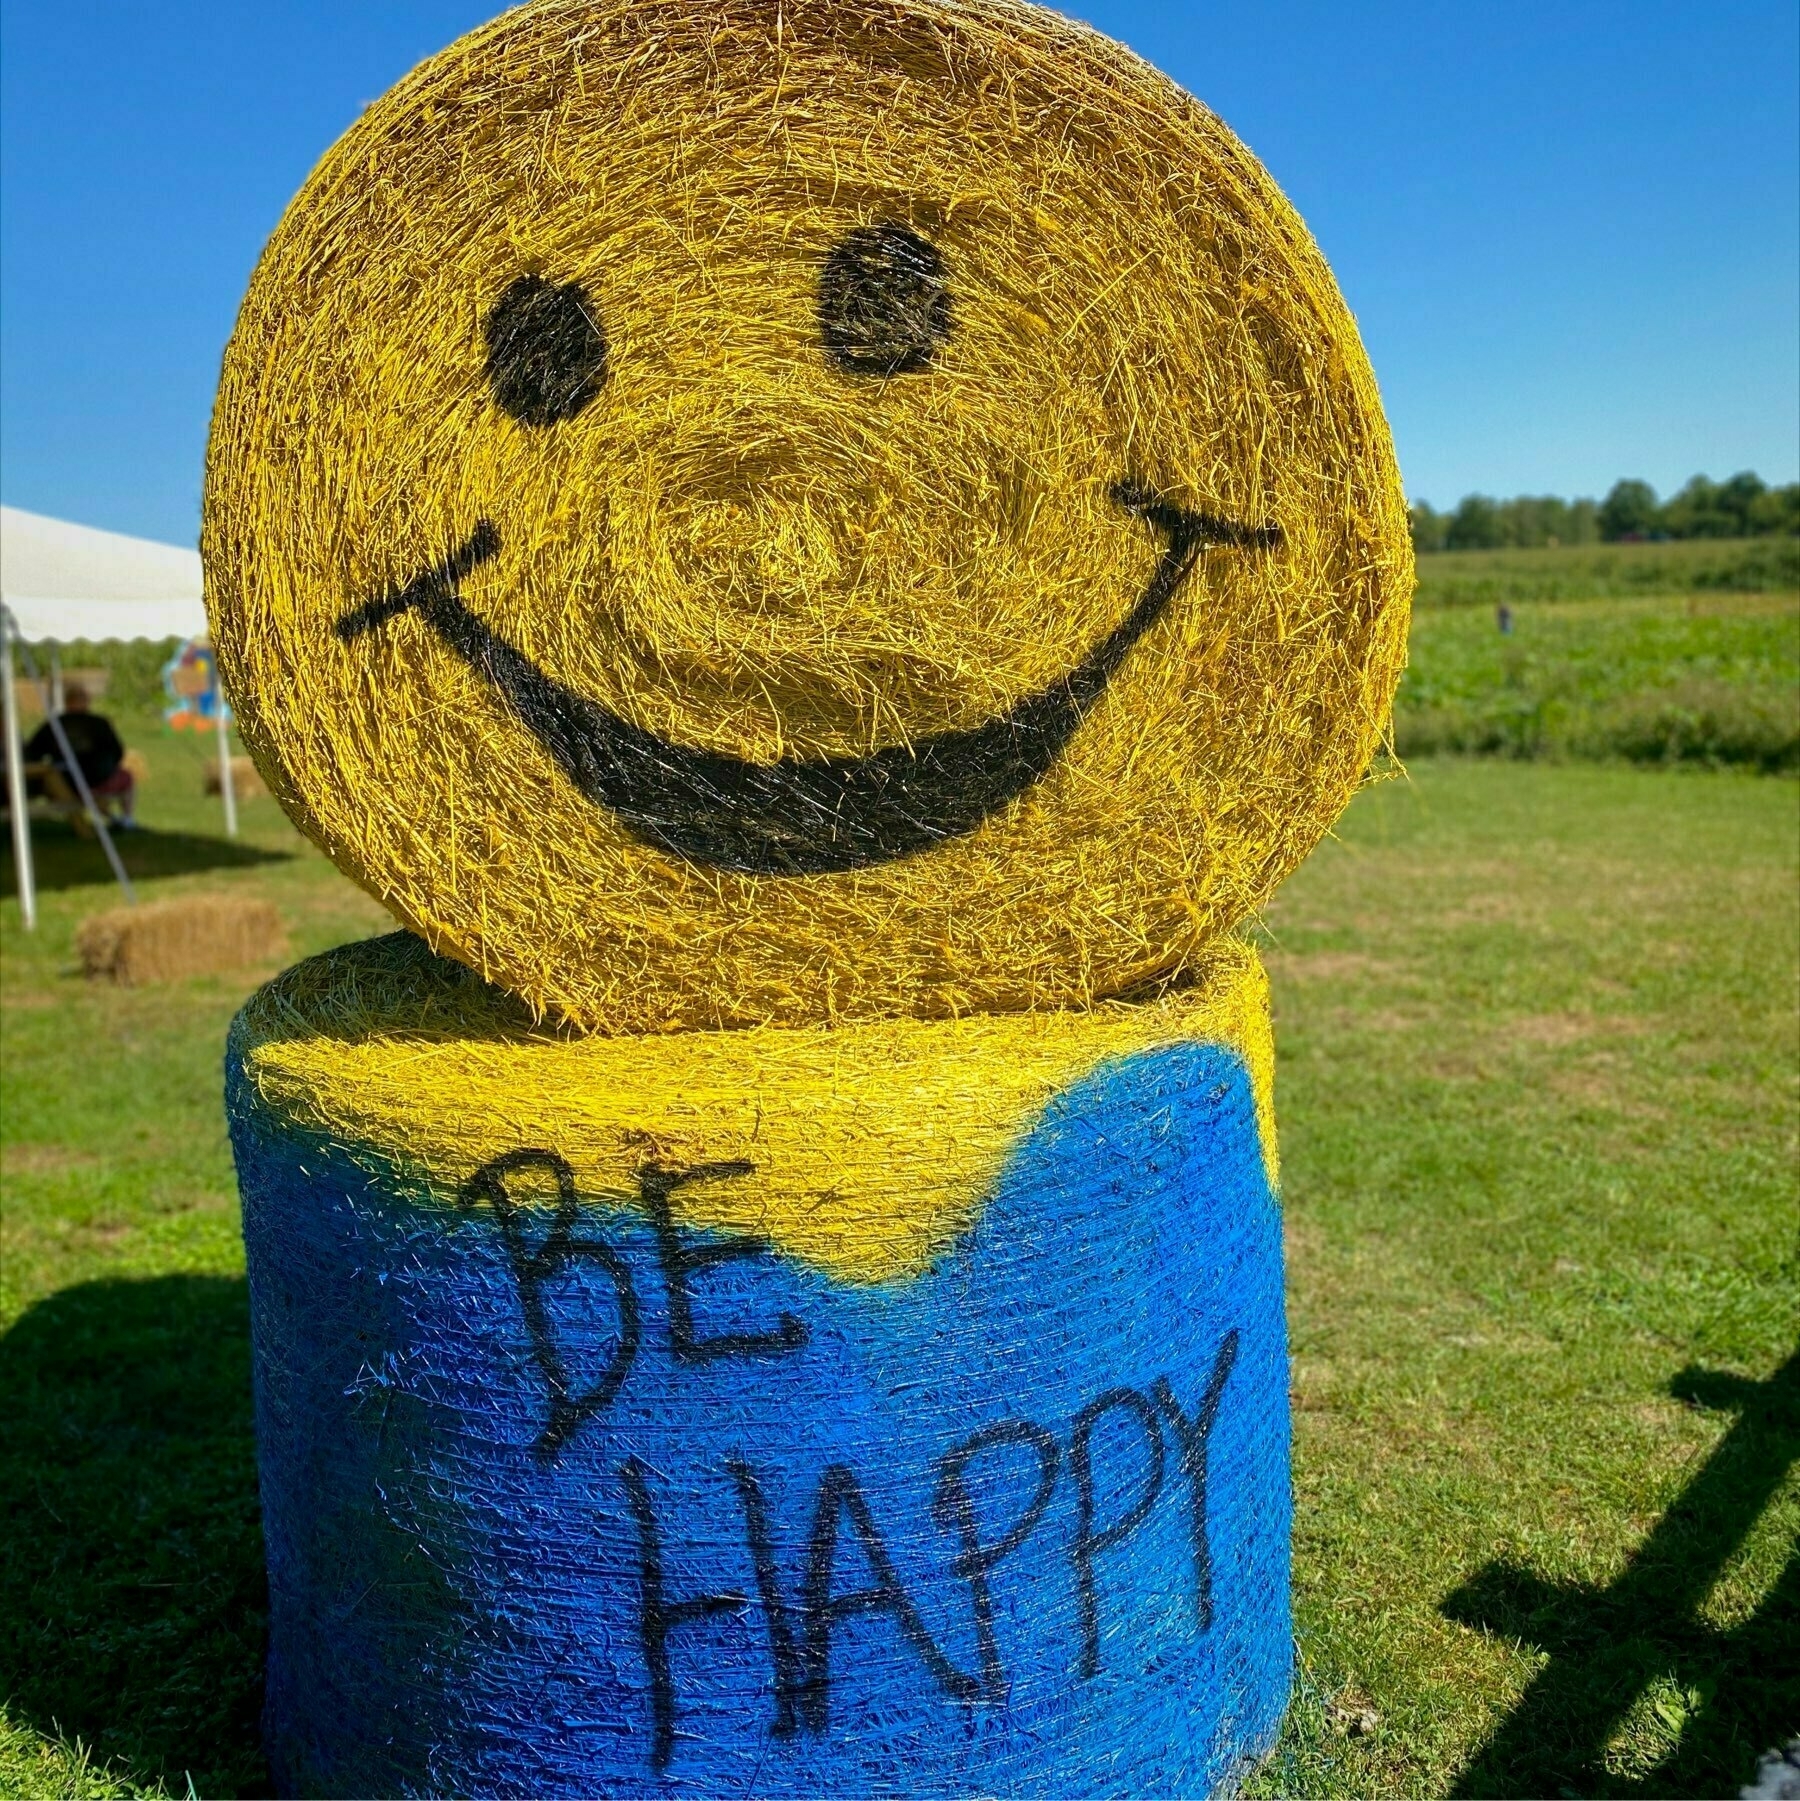 hay bale with the words "be happy" on it